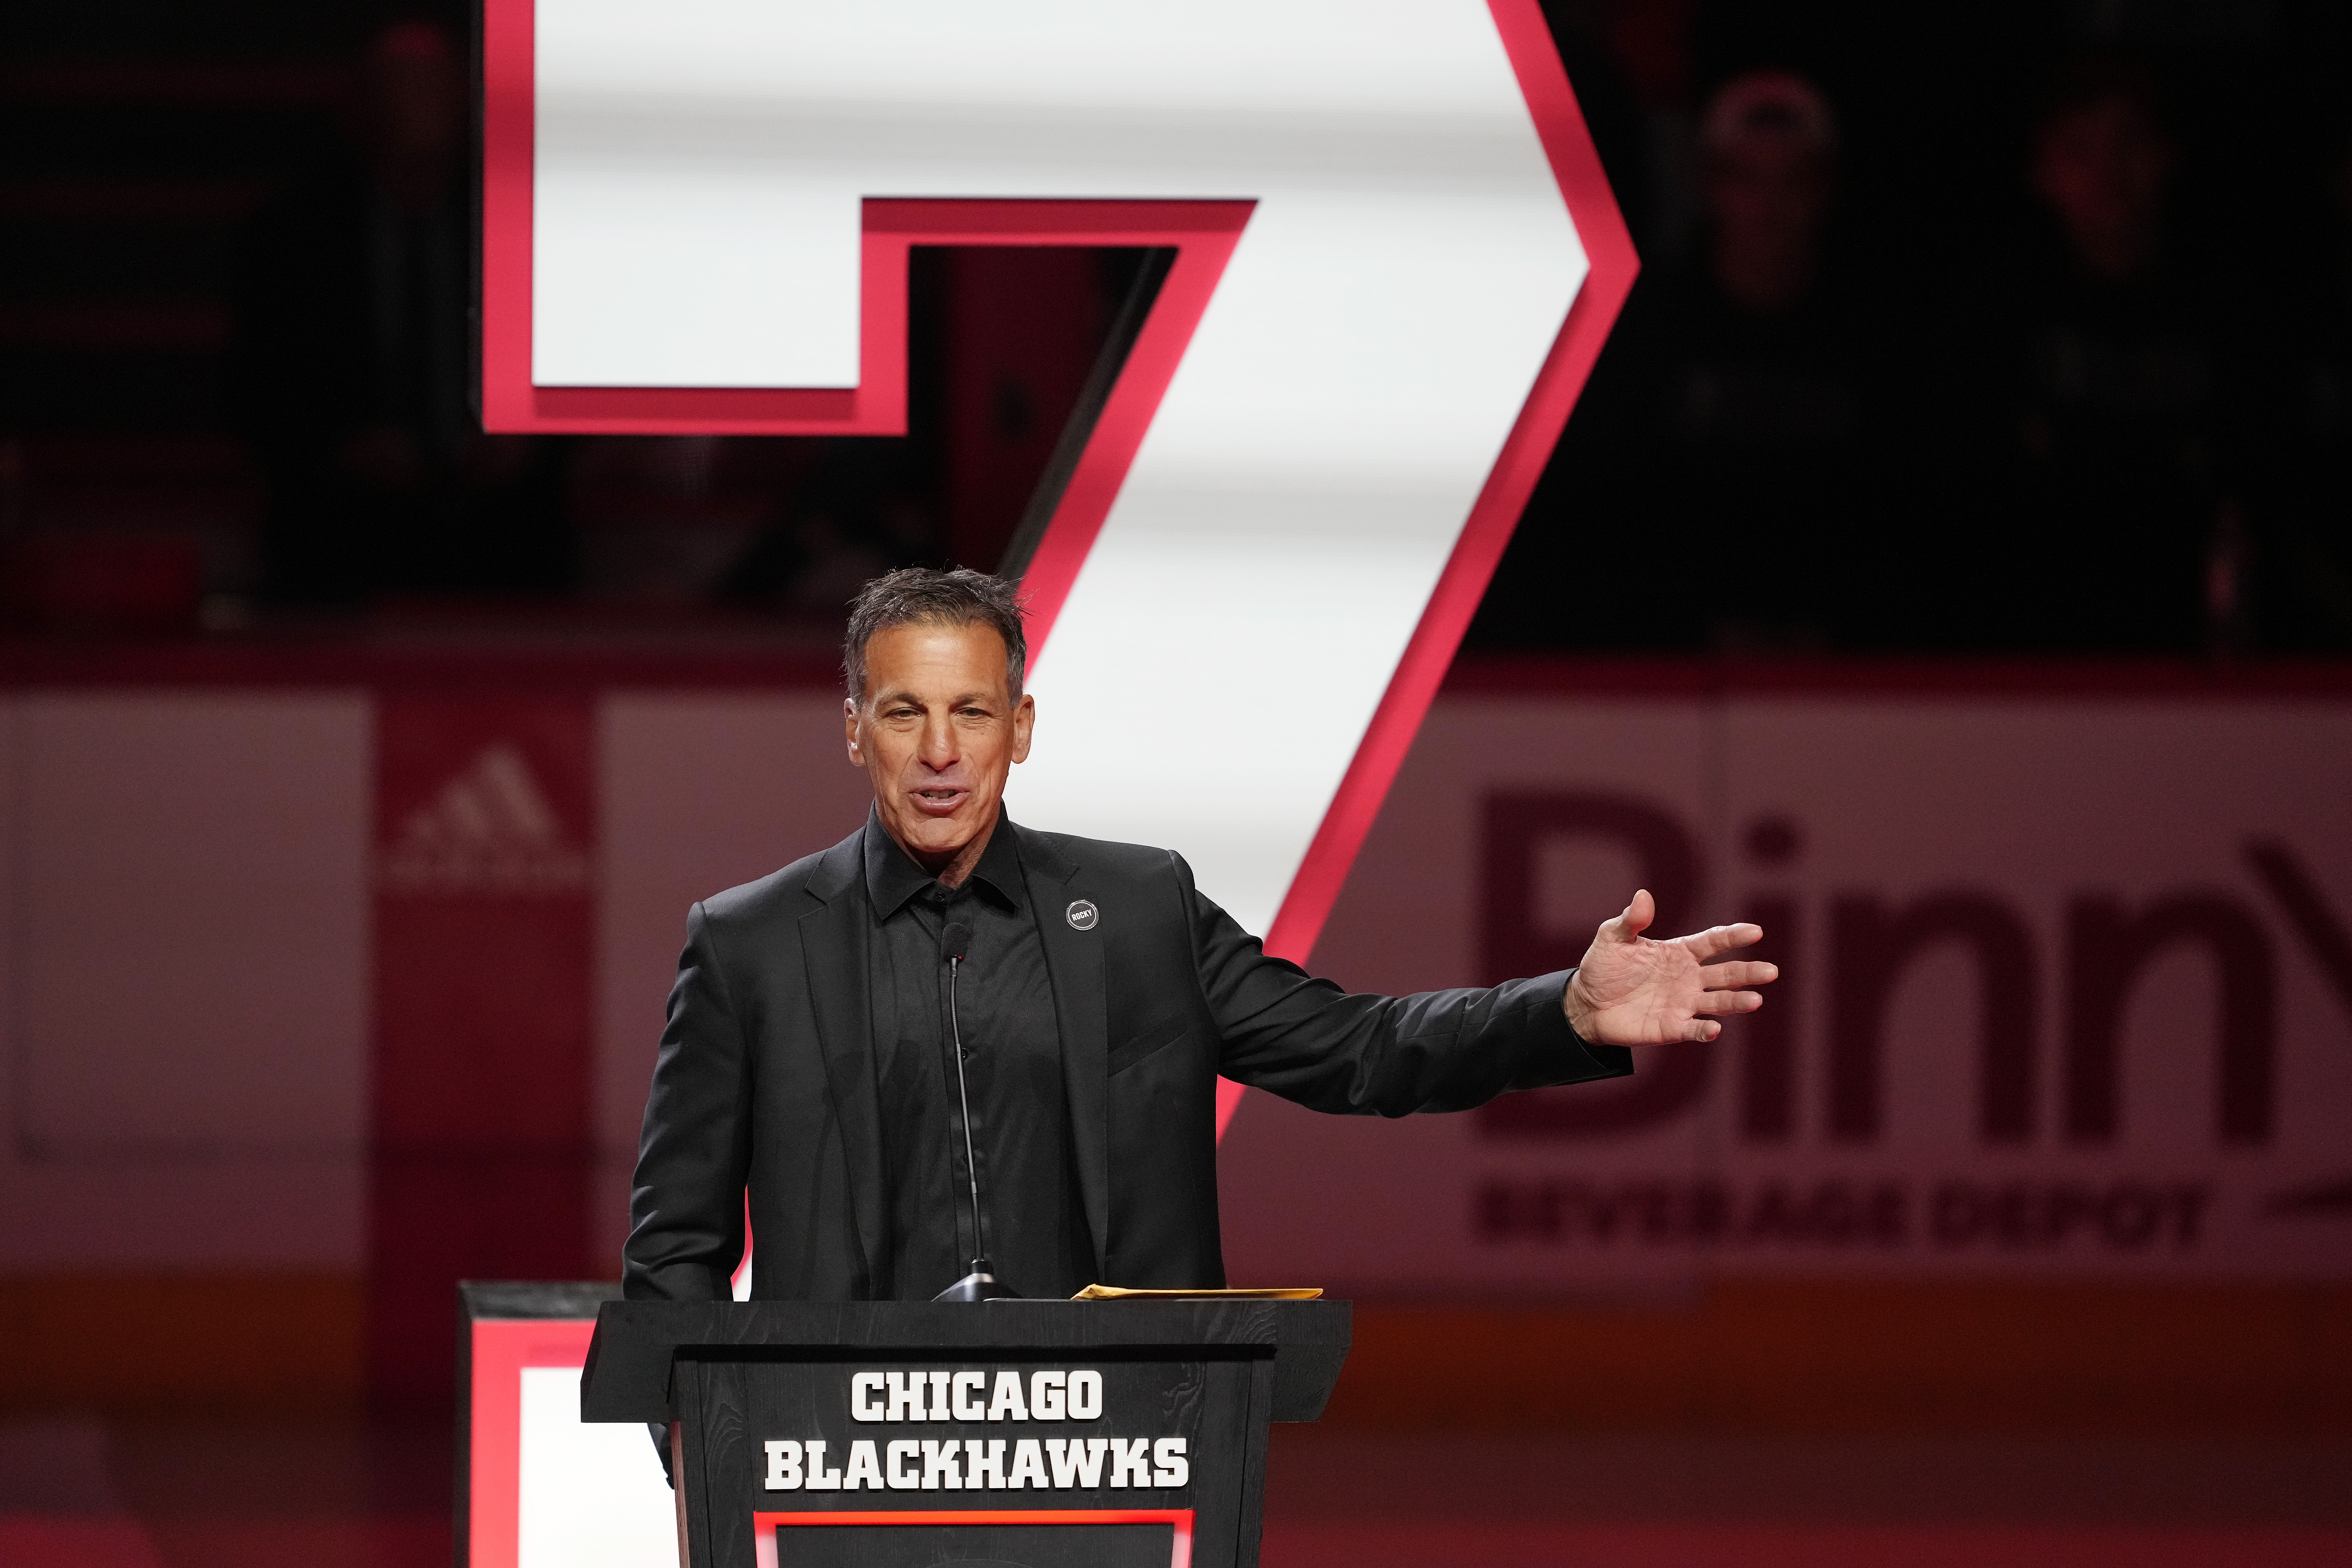 Former Chicago Blackhawks player Chris Chelios speaks during a jersey retirement celebration prior to the game between the Detroit Red Wings and the Chicago Blackhawks at the United Center on February 25, 2024 in Chicago, Illinois.